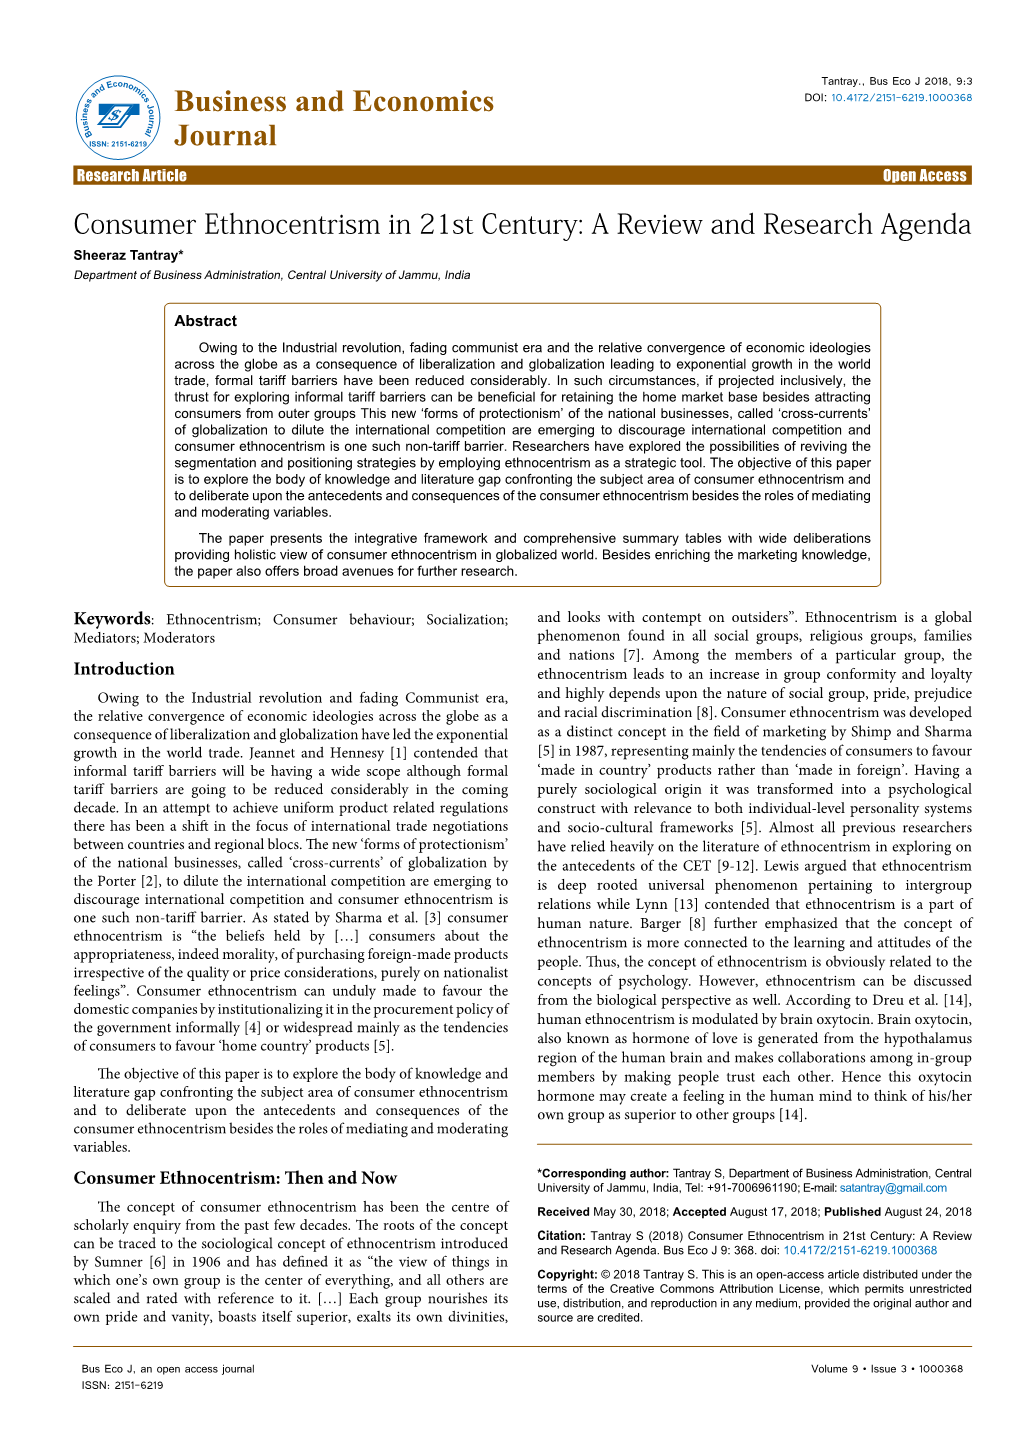 Consumer Ethnocentrism in 21St Century: a Review and Research Agenda Sheeraz Tantray* Department of Business Administration, Central University of Jammu, India